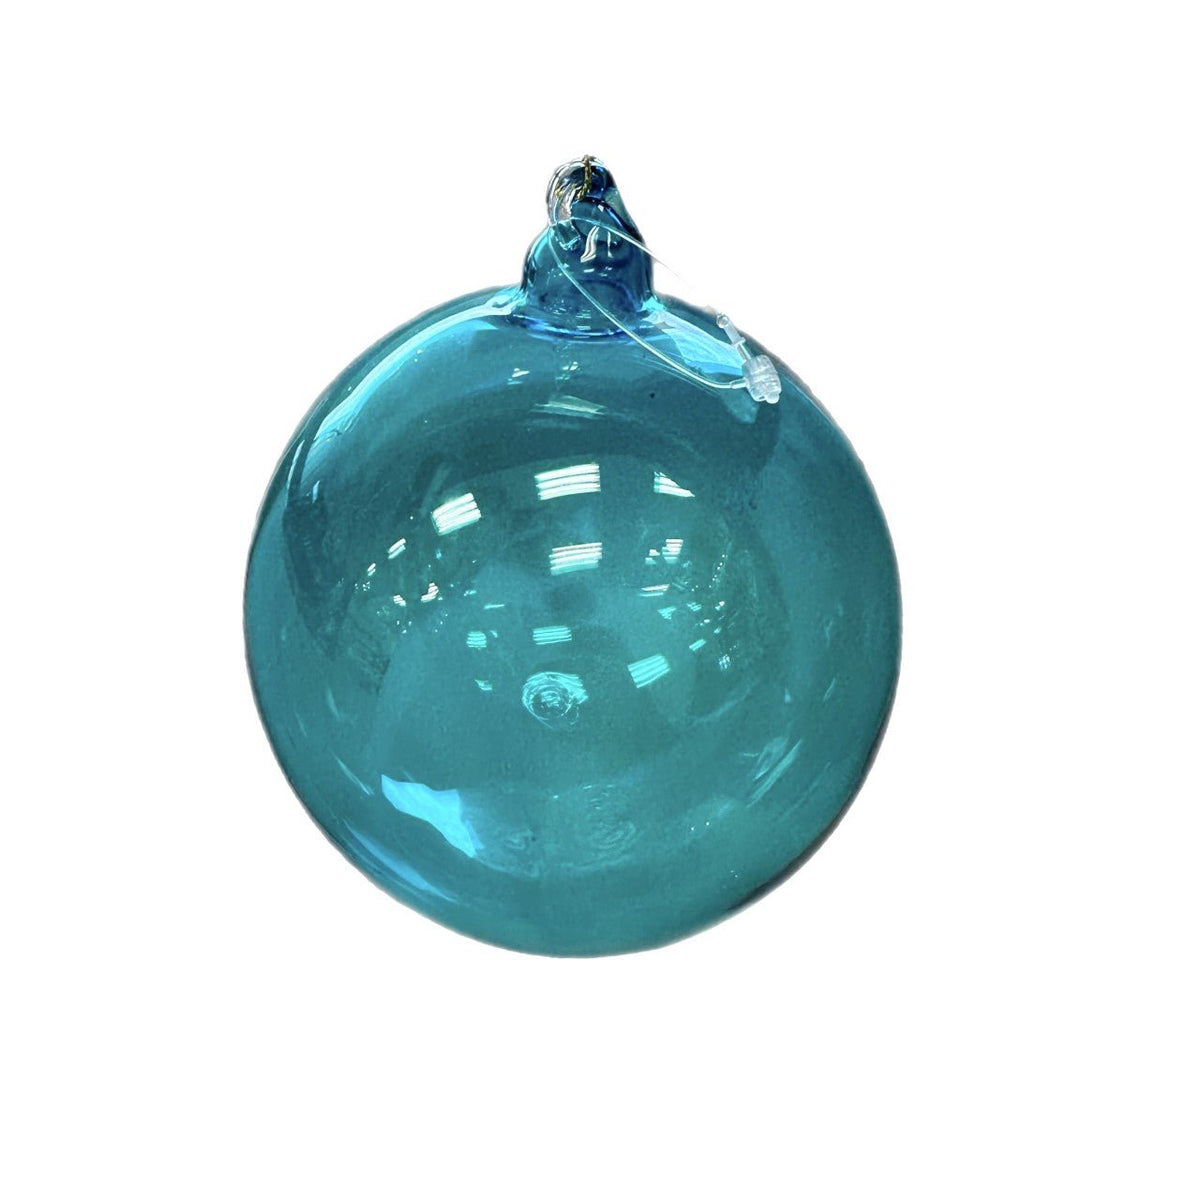 100mm Translucent Blue Glass Ornament 6pc - Holiday Warehouse